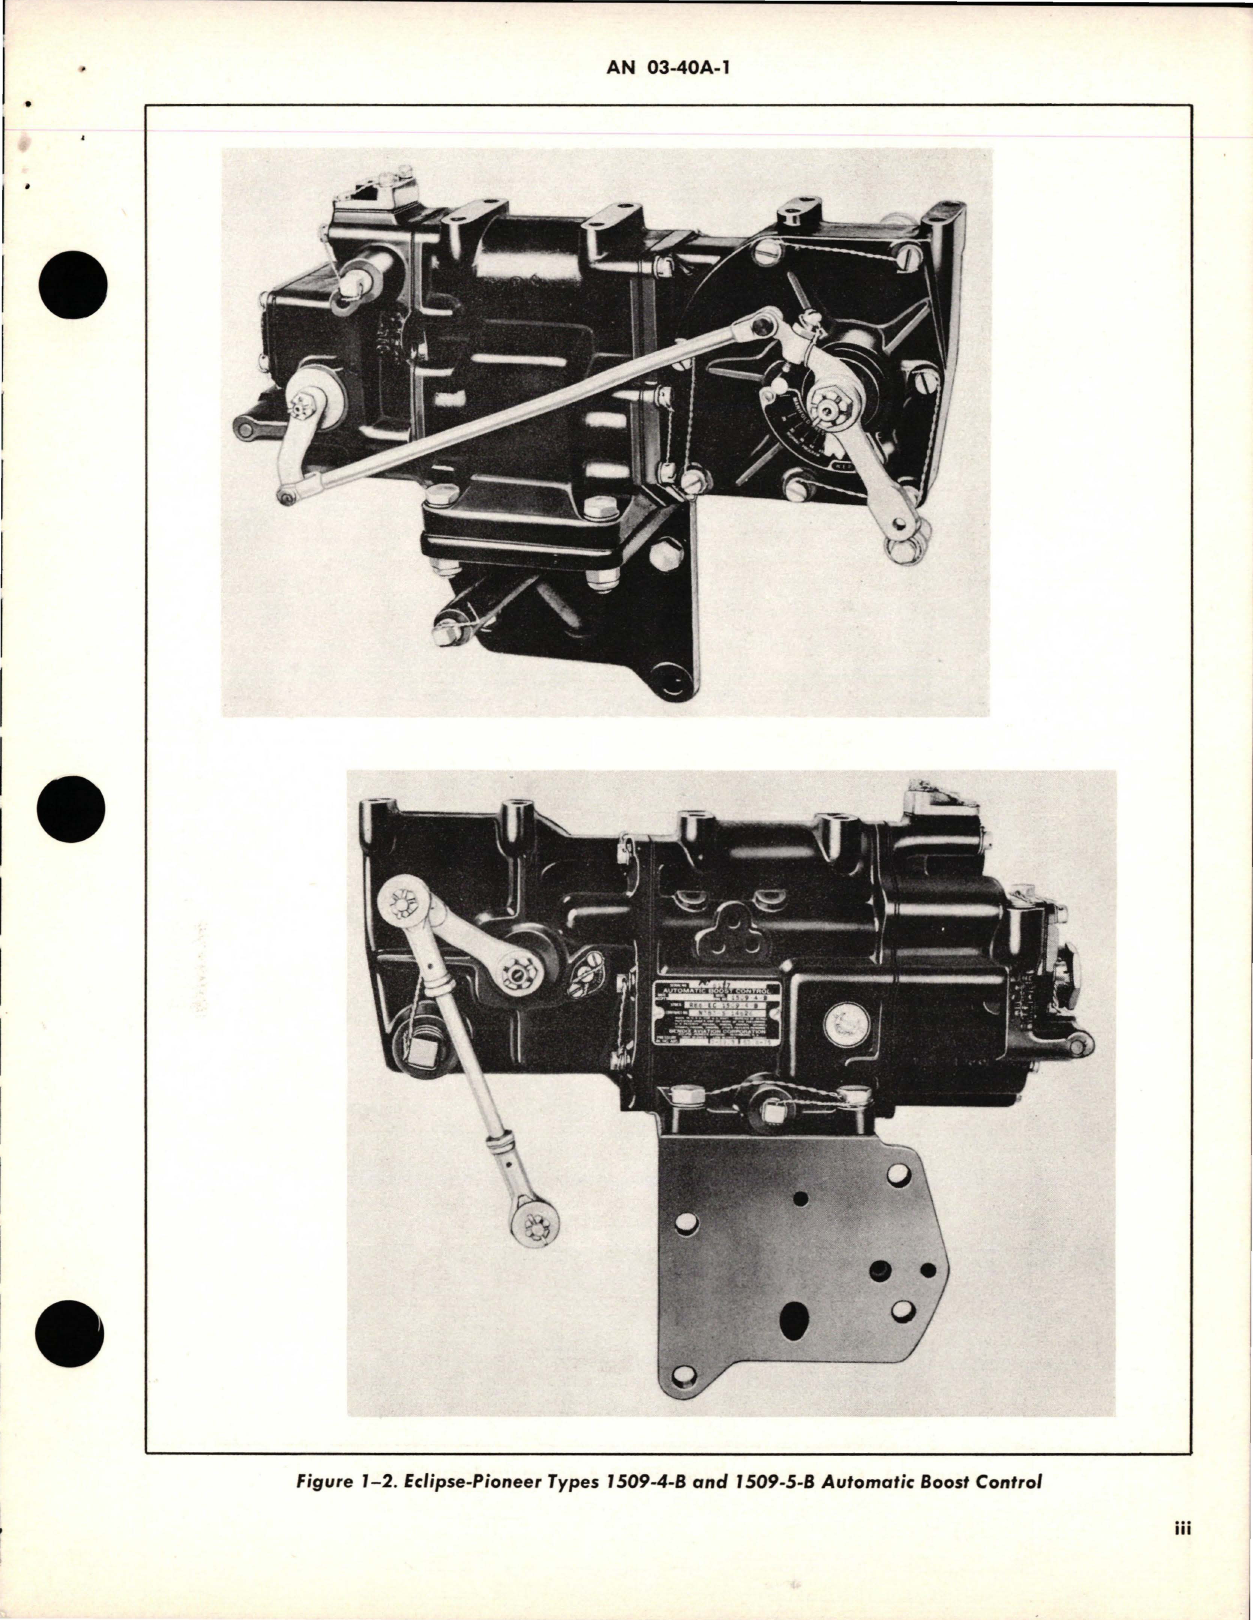 Sample page 5 from AirCorps Library document: Operation and Service Instructions for Automatic Boost Control - Types 1509-2-A, 1509-4-B, and 1509-5-B